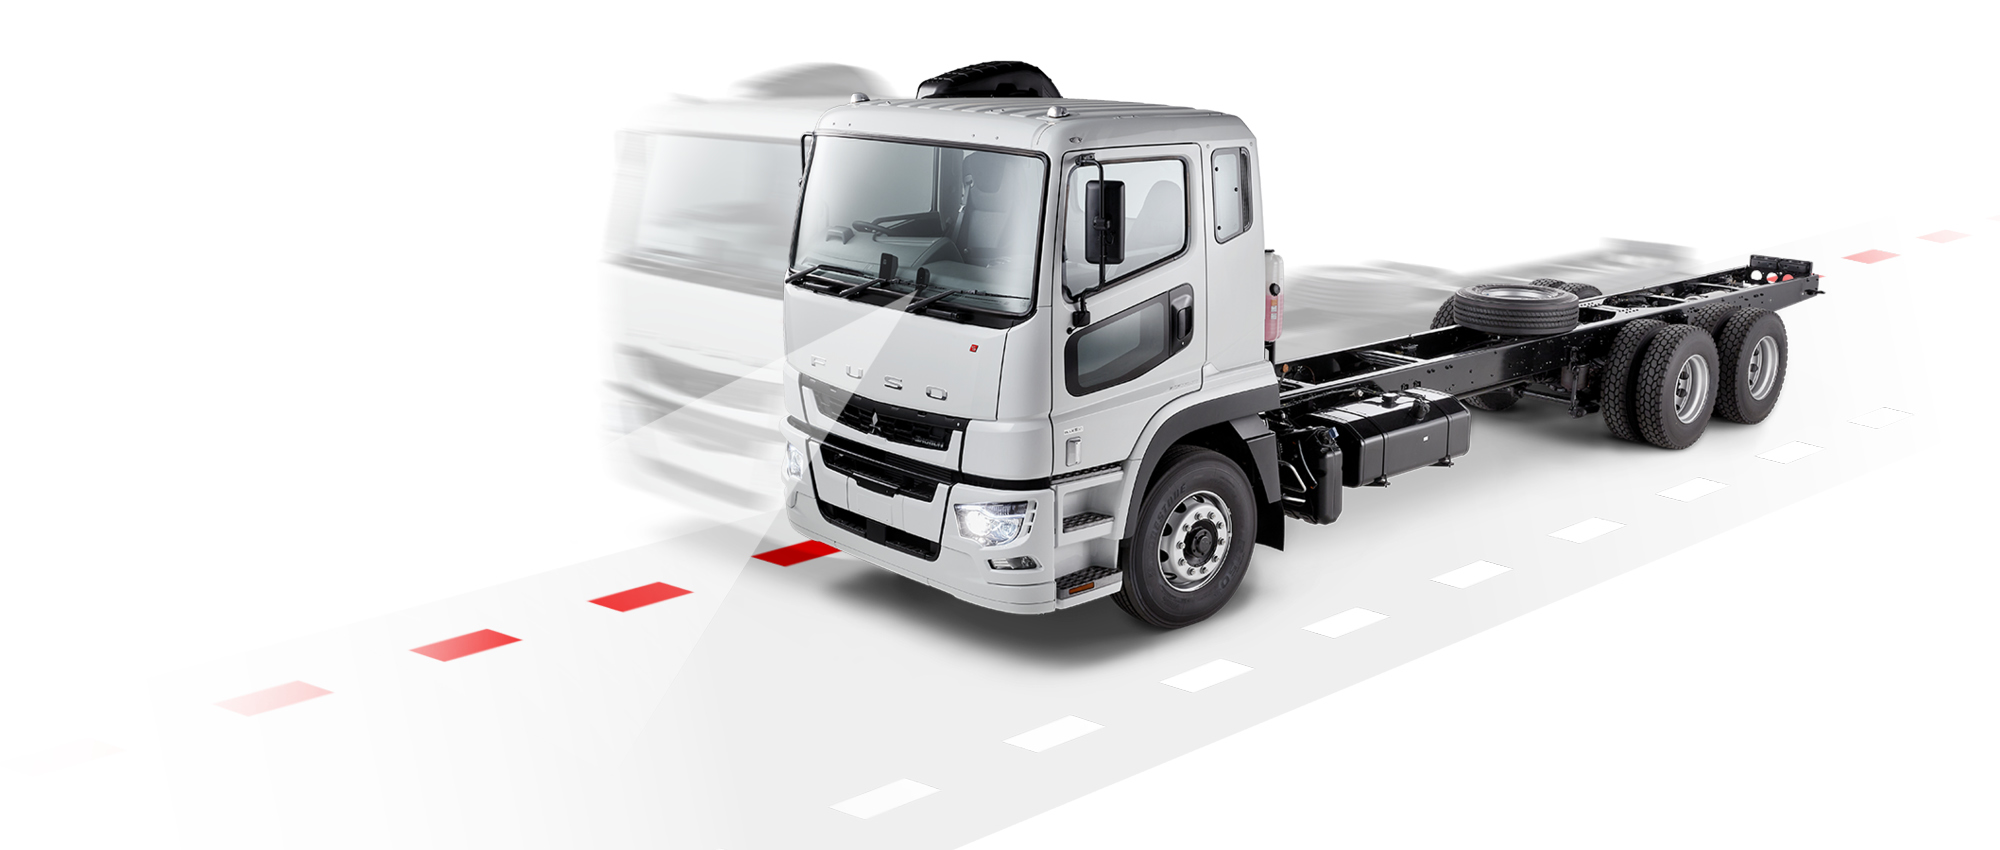 Lane Keeping Assist helps ensure Daimler trucks don’t stray into another lane 